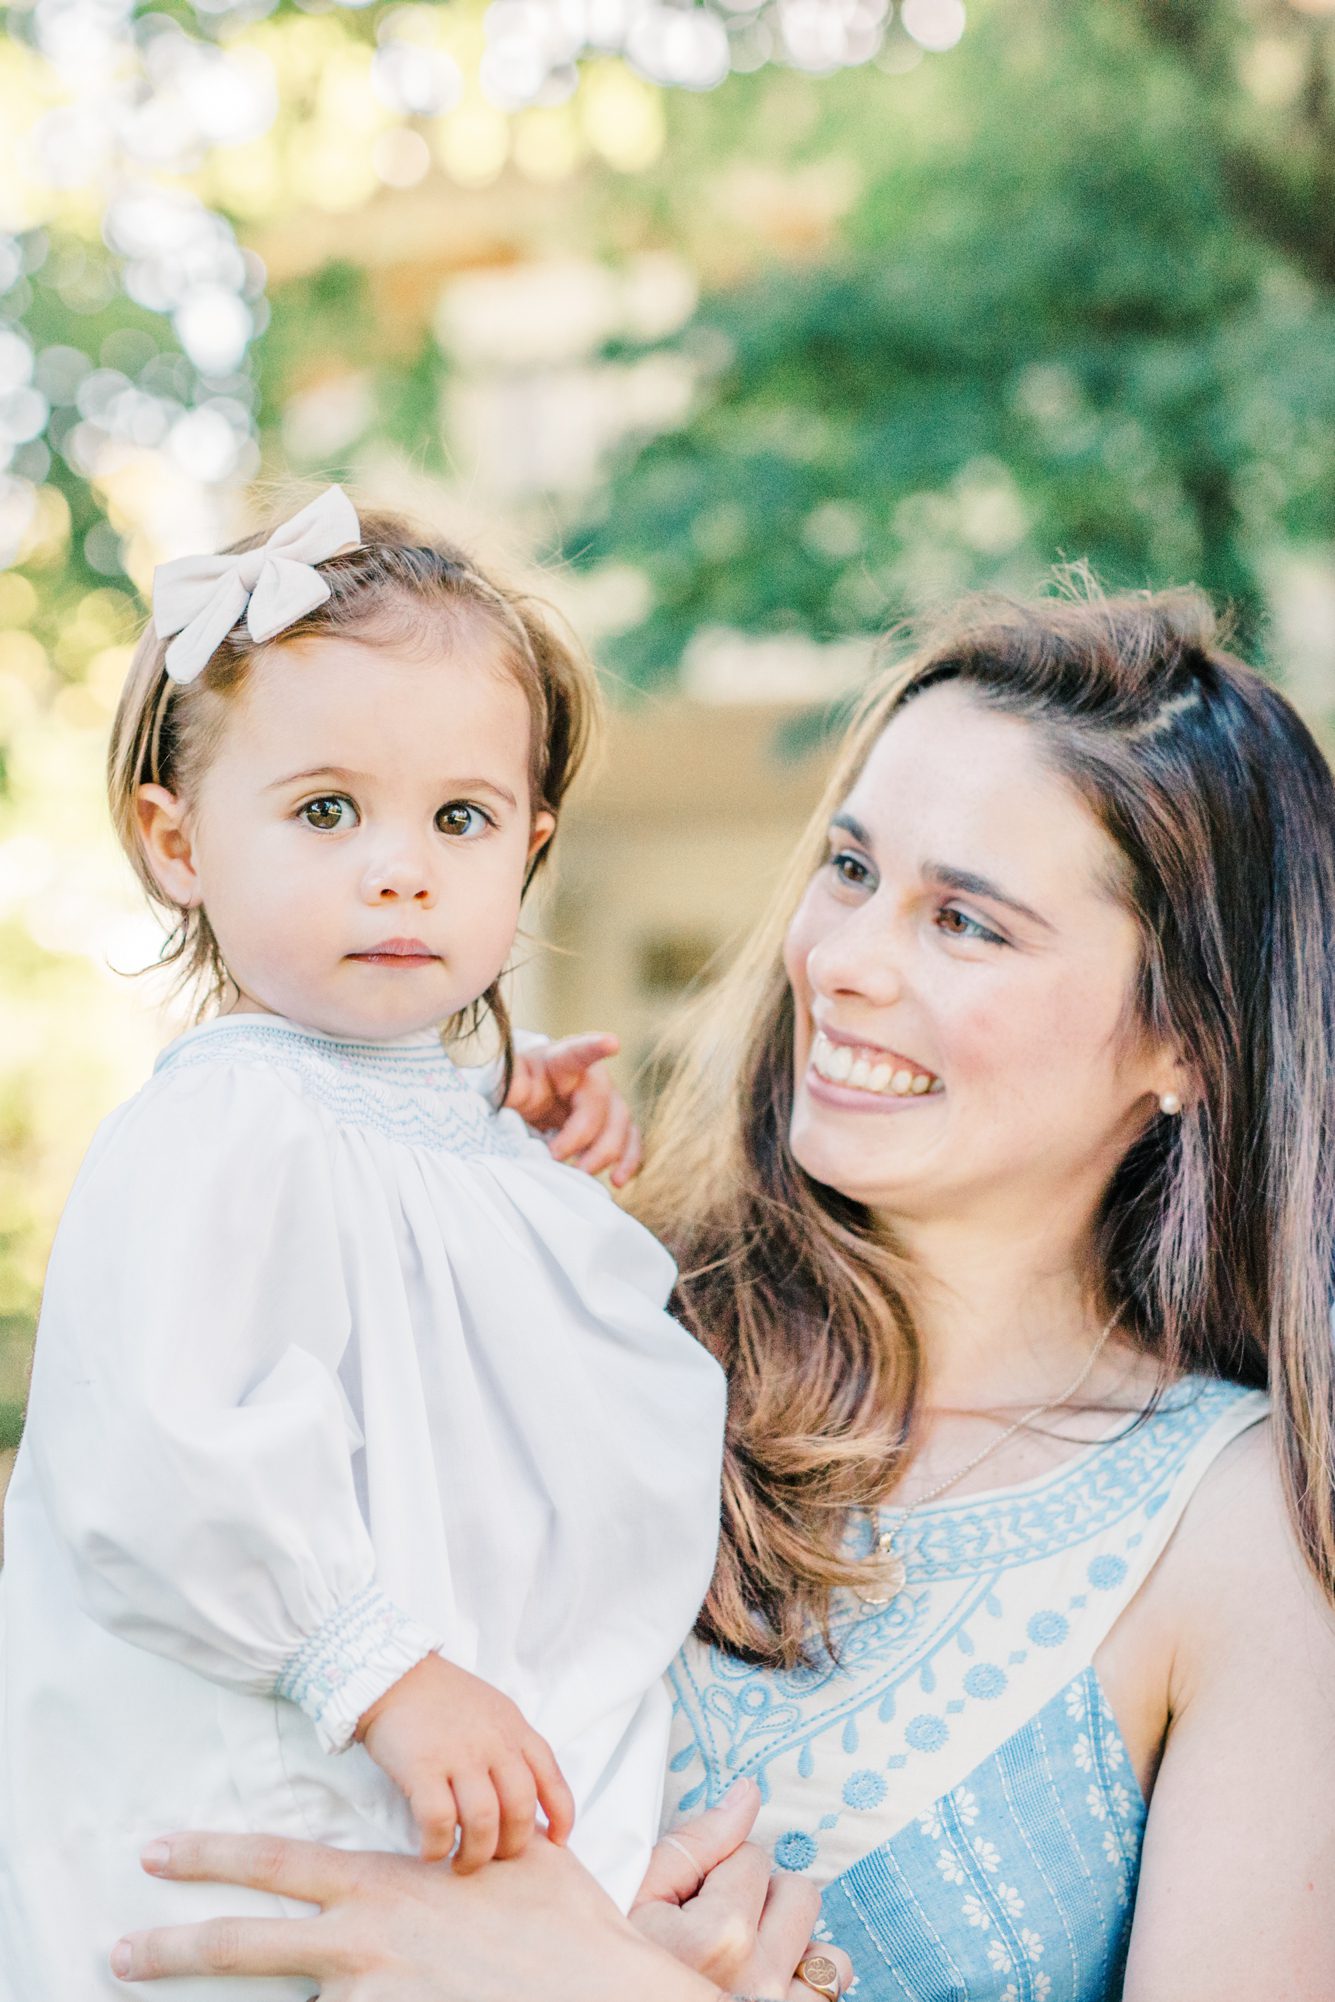 Beautiful Mom and daughter portrait. Photo by LRG Portraits.